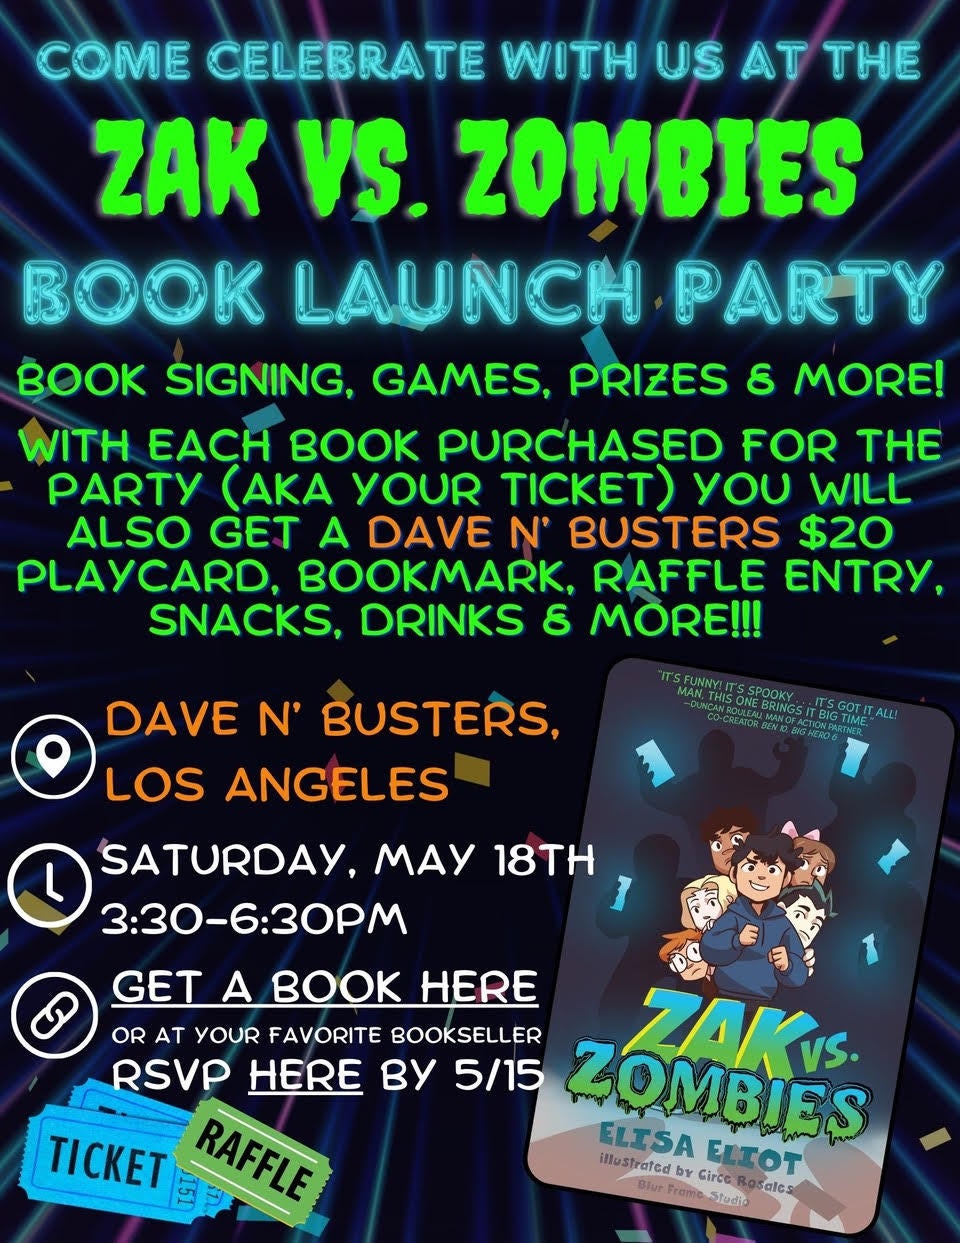 elisa-eliot-zak-vs-zombies-book-signing-launch-party-at-dave-busters-may-18.jpg